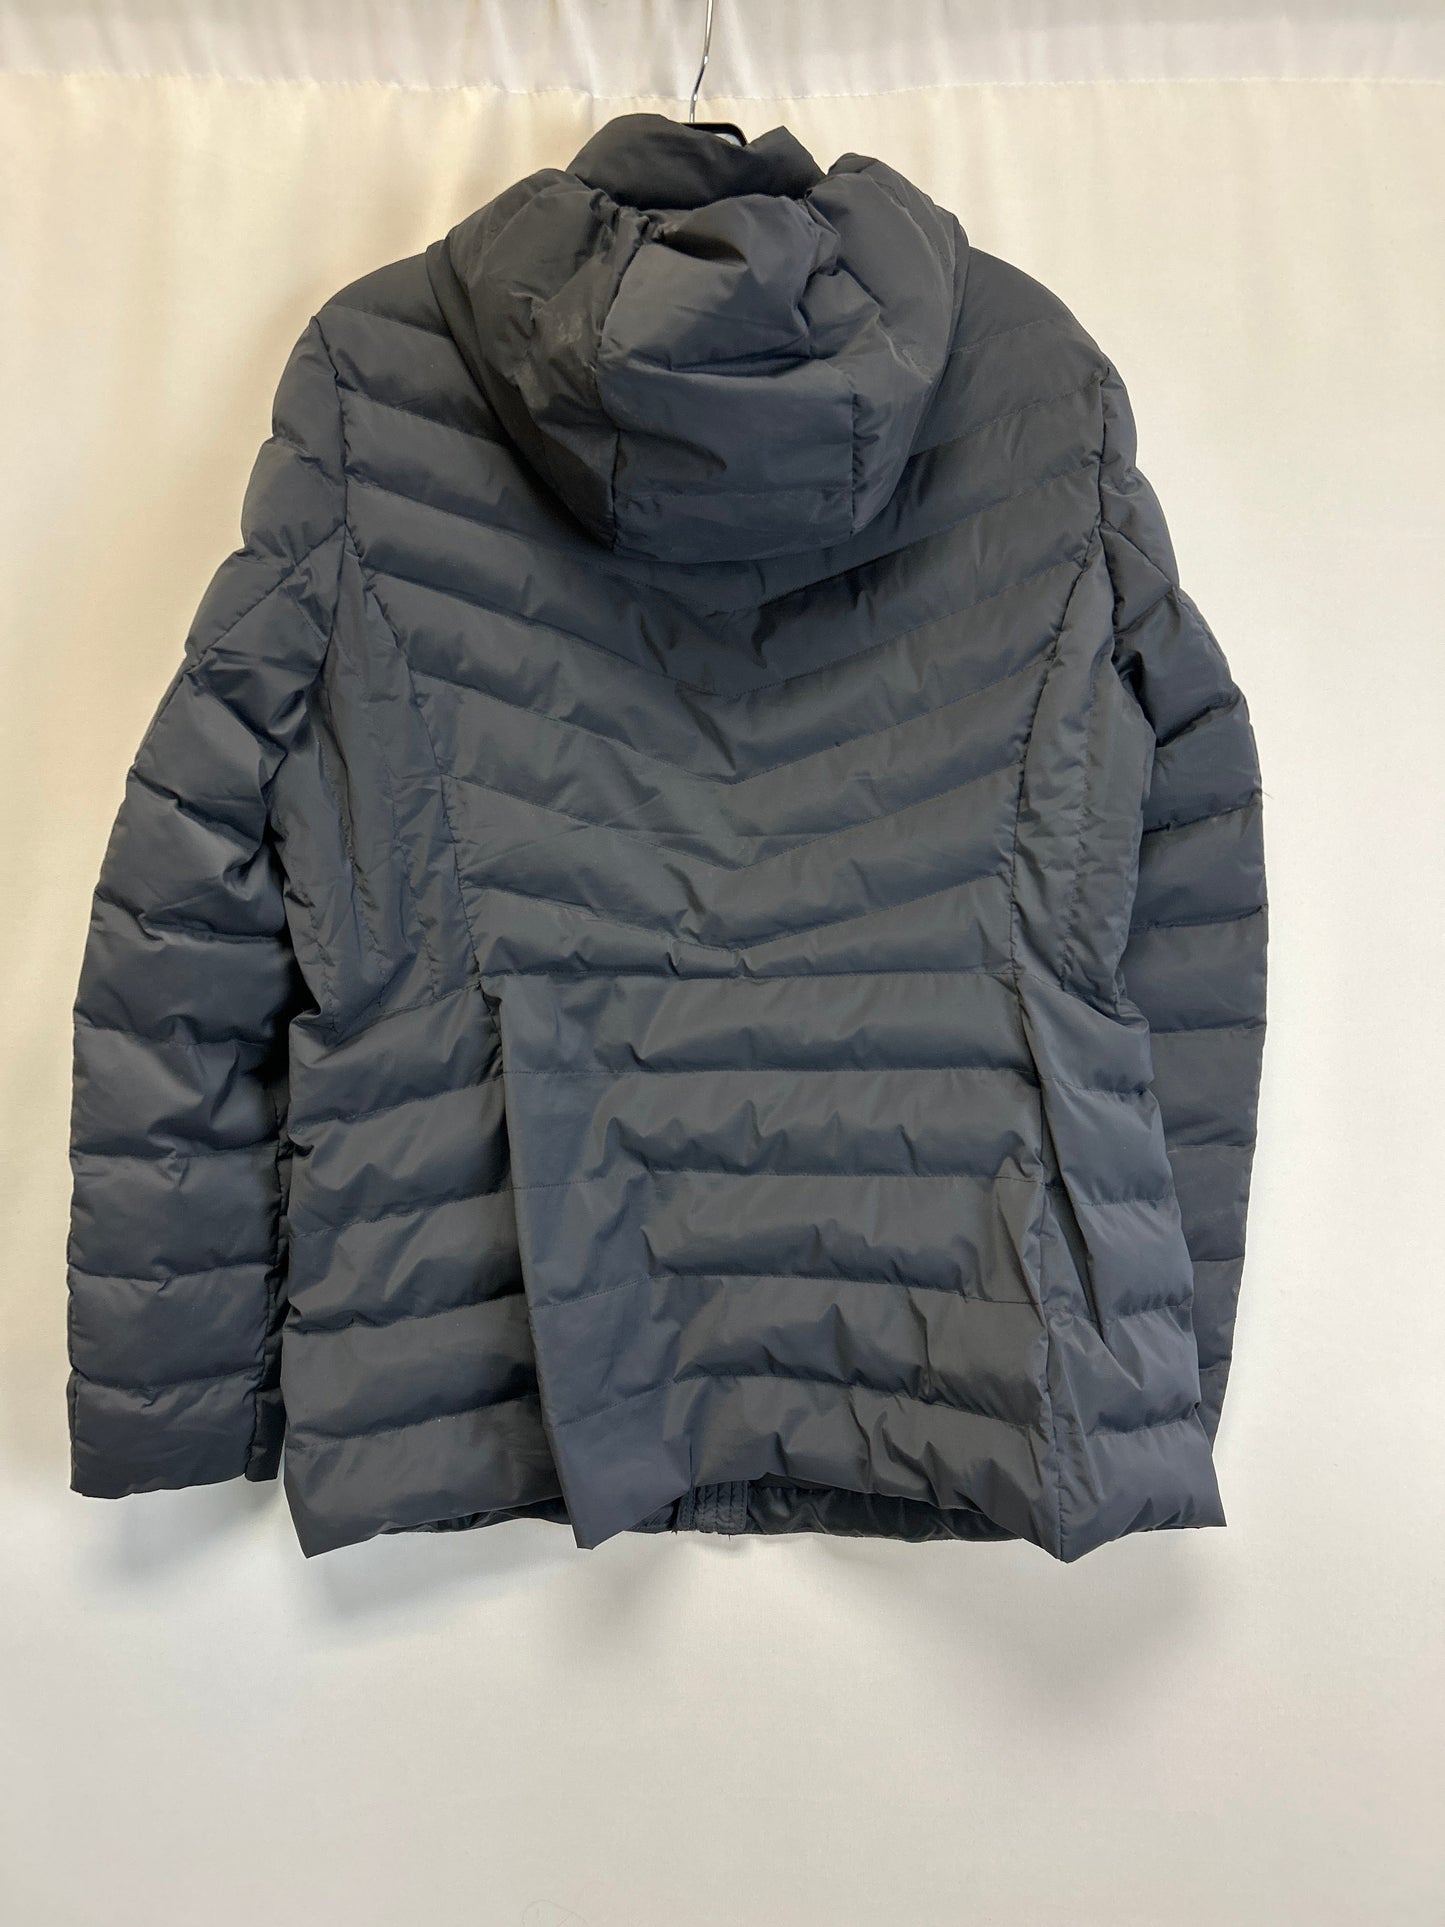 Coat Puffer & Quilted By 32 Degrees  Size: L